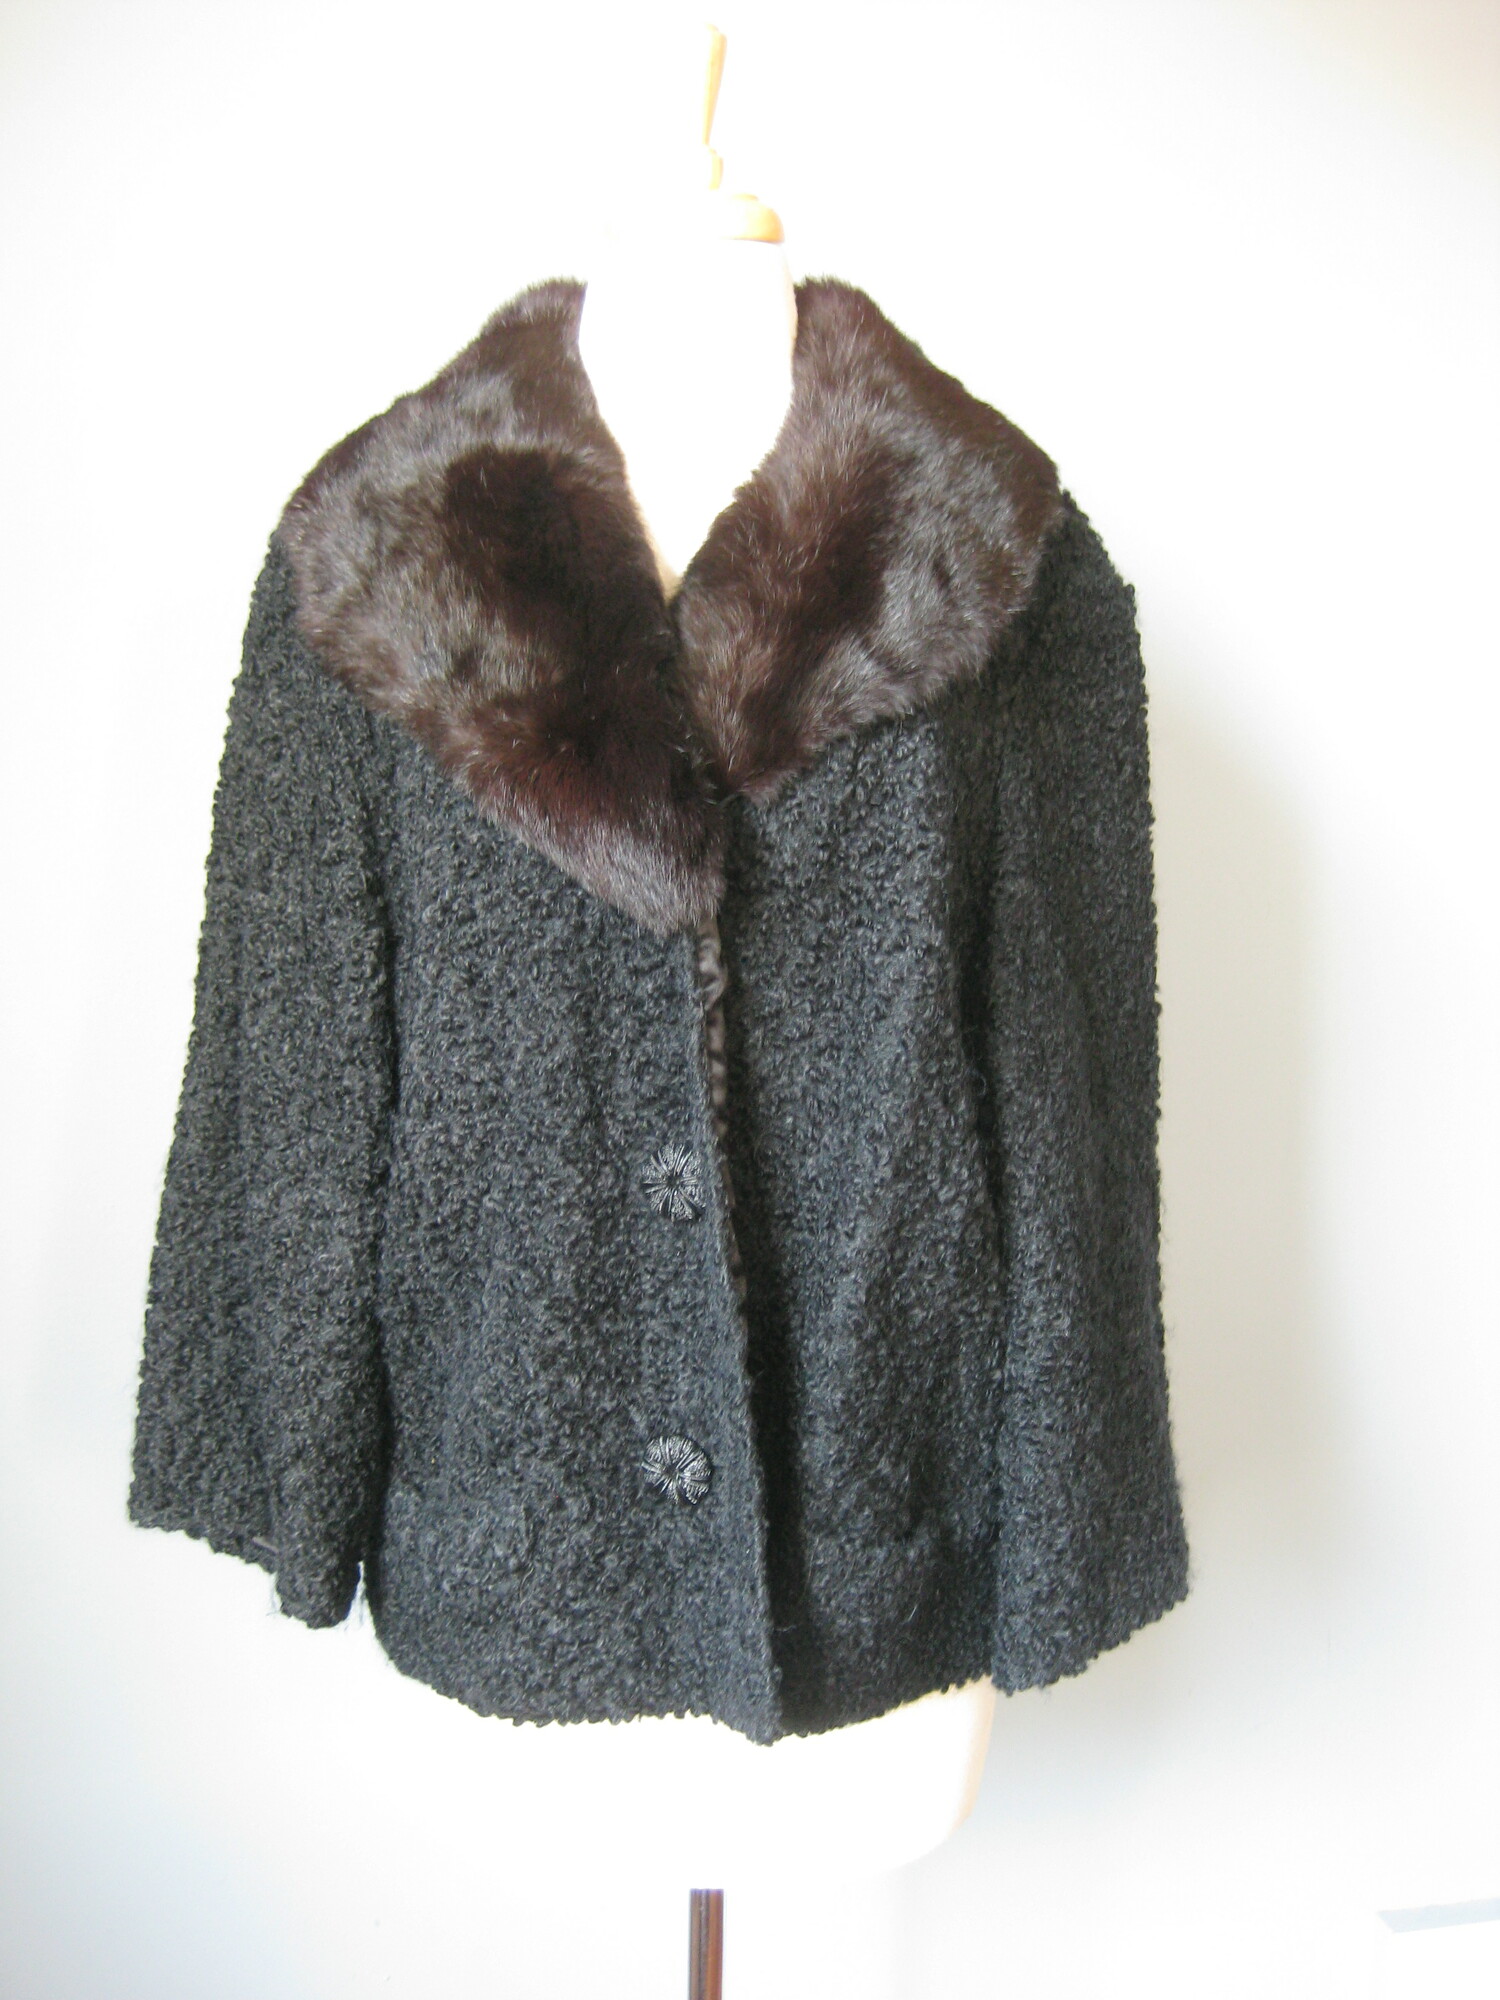 Vtg Wagenheim Pers. Lamb, Black, Size: Large
This is a short faux persian lamb jacket with a fur collar.
The body is black and the collar is a dark brown genuine mink
Fully lined in satin, with the former owners initial embroidered inside.
Purchased at a venerated fur salon in Amsterdam NY in the 1950s or 60s
flat measurements taken on the inside:
armpit to armpit 24
Length: 24.75

Thanks for looking!
#42342